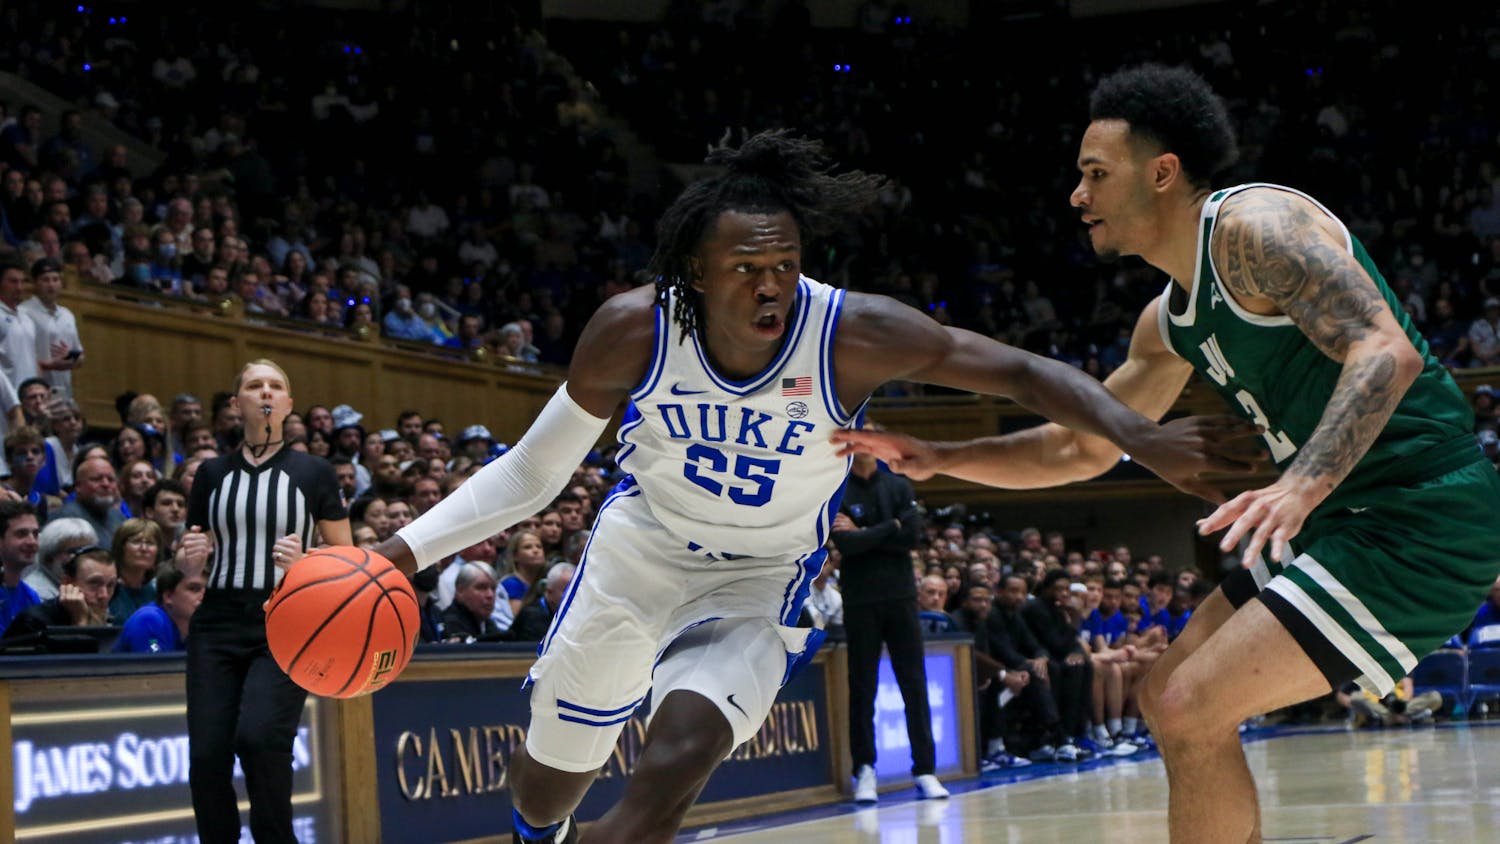 Freshman Mark Mitchell led Duke in scoring with 18 points in his debut.